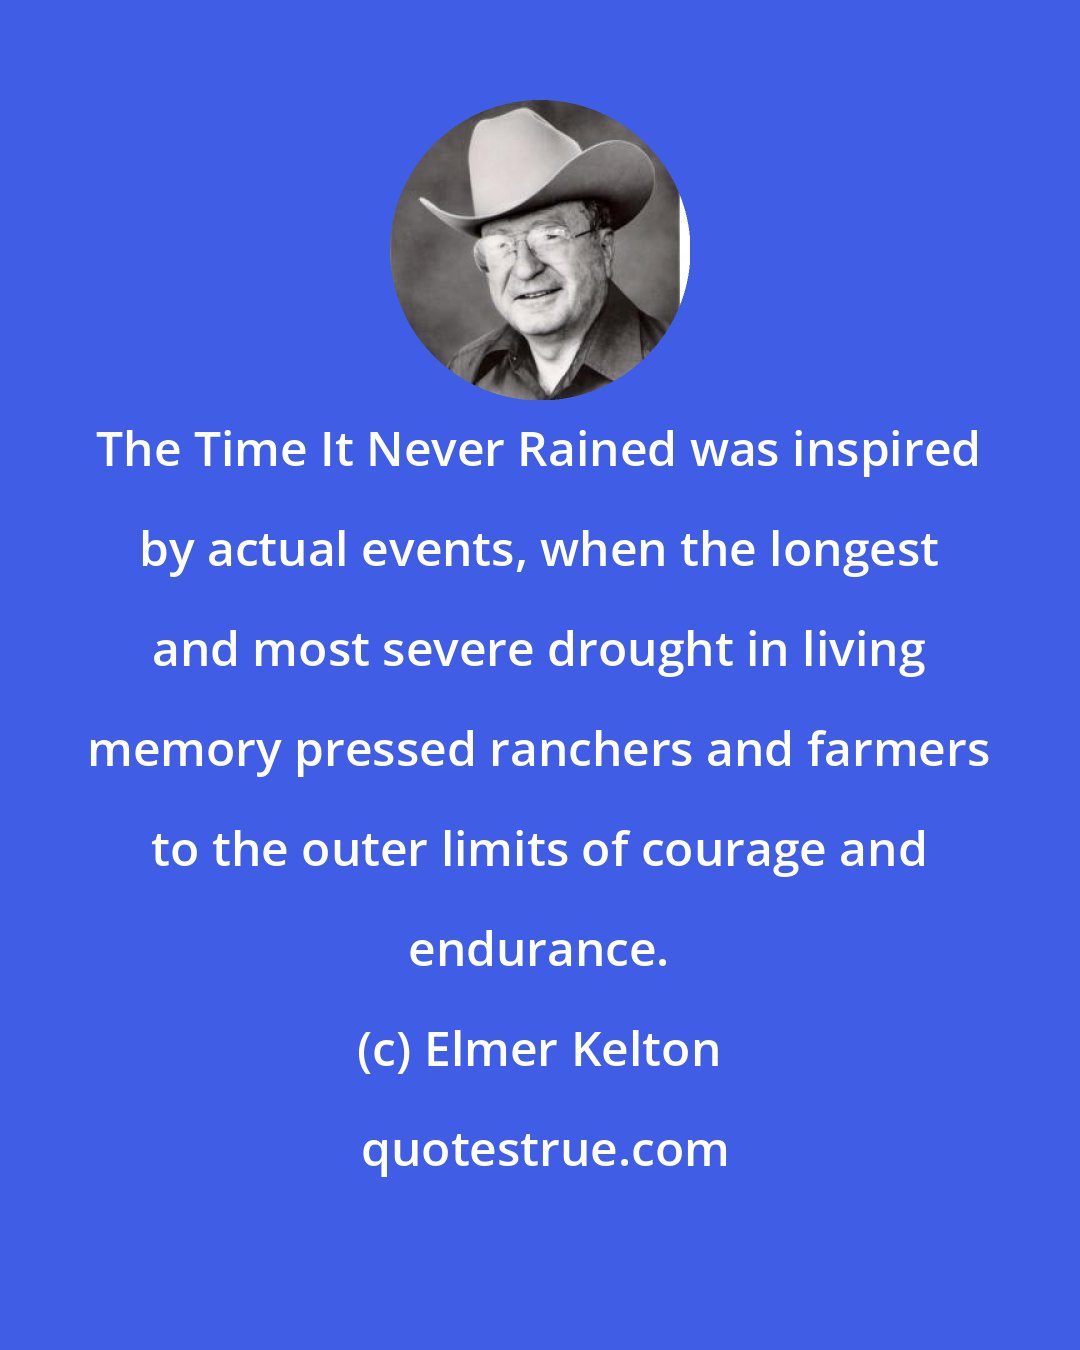 Elmer Kelton: The Time It Never Rained was inspired by actual events, when the longest and most severe drought in living memory pressed ranchers and farmers to the outer limits of courage and endurance.